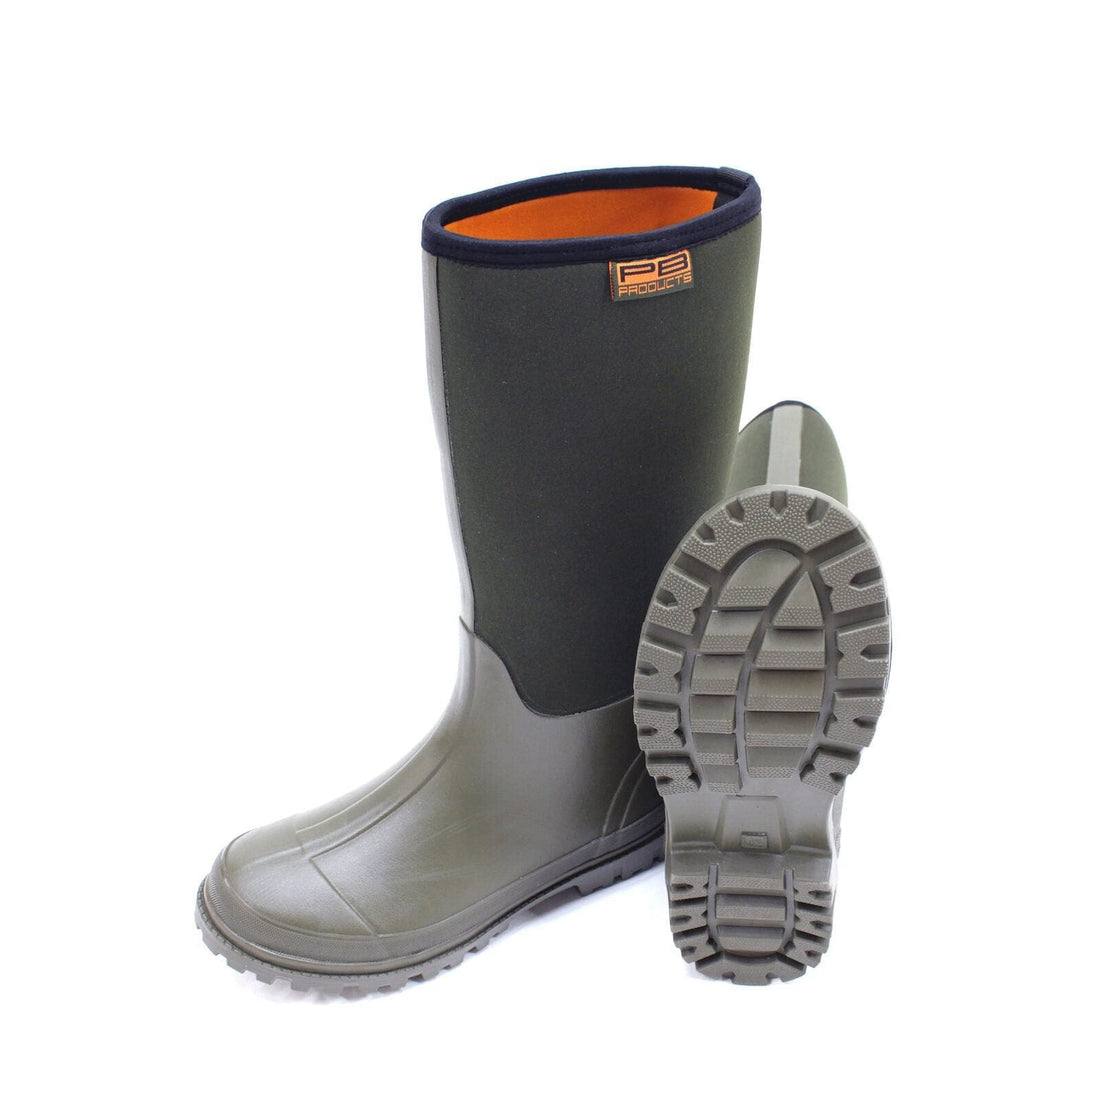 PB Products Neoprene Boots 6mm 40